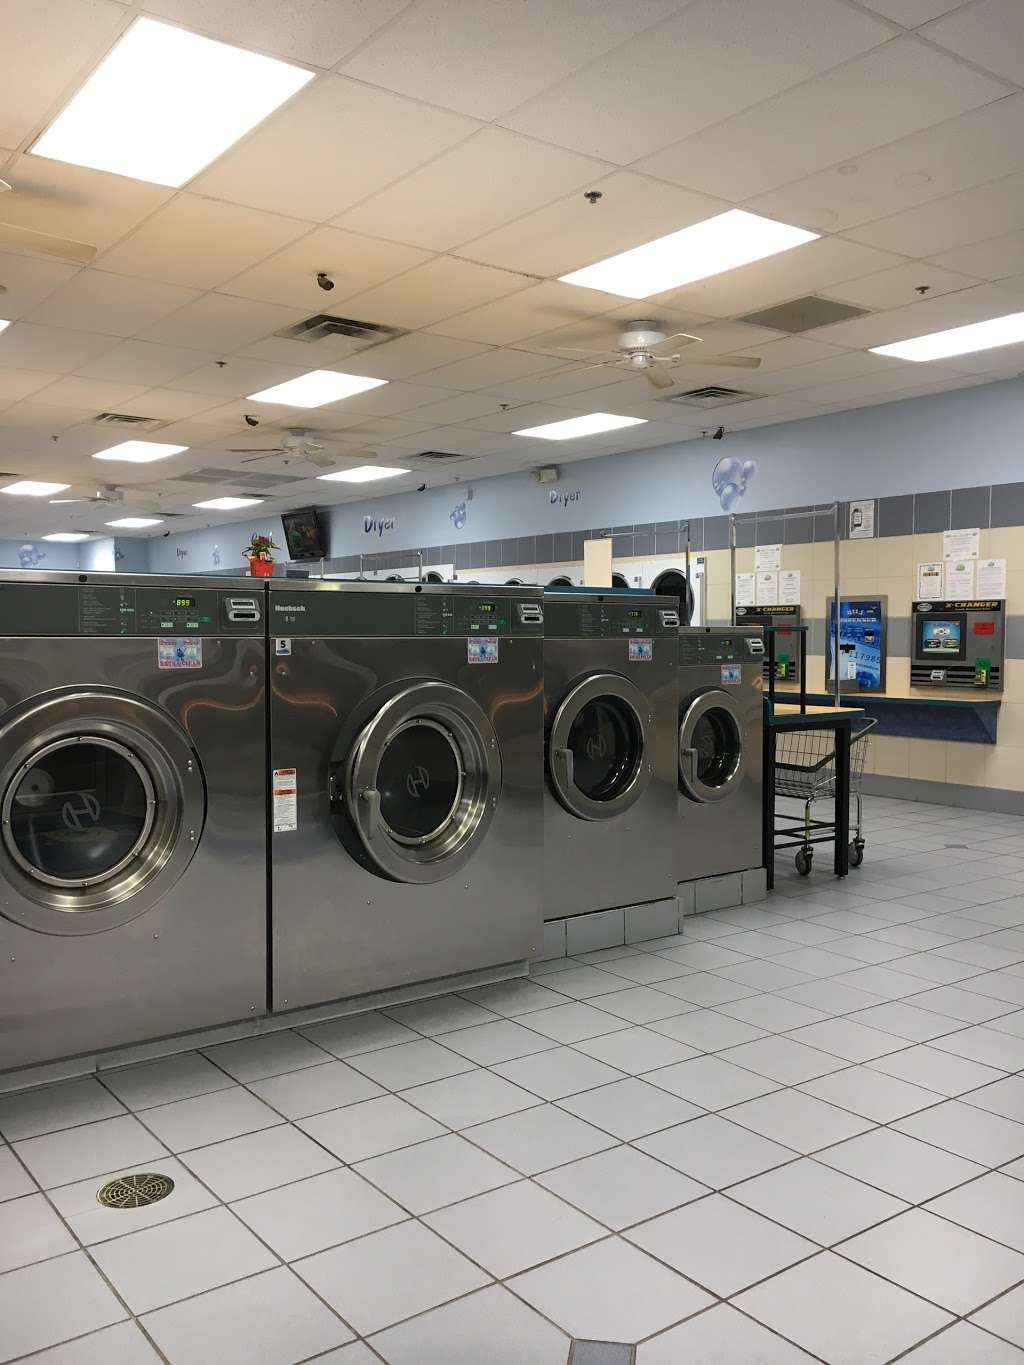 Soap Opera Laundromat - Downers Grove | 6340 Woodward Ave, Downers Grove, IL 60516 | Phone: (630) 810-1860